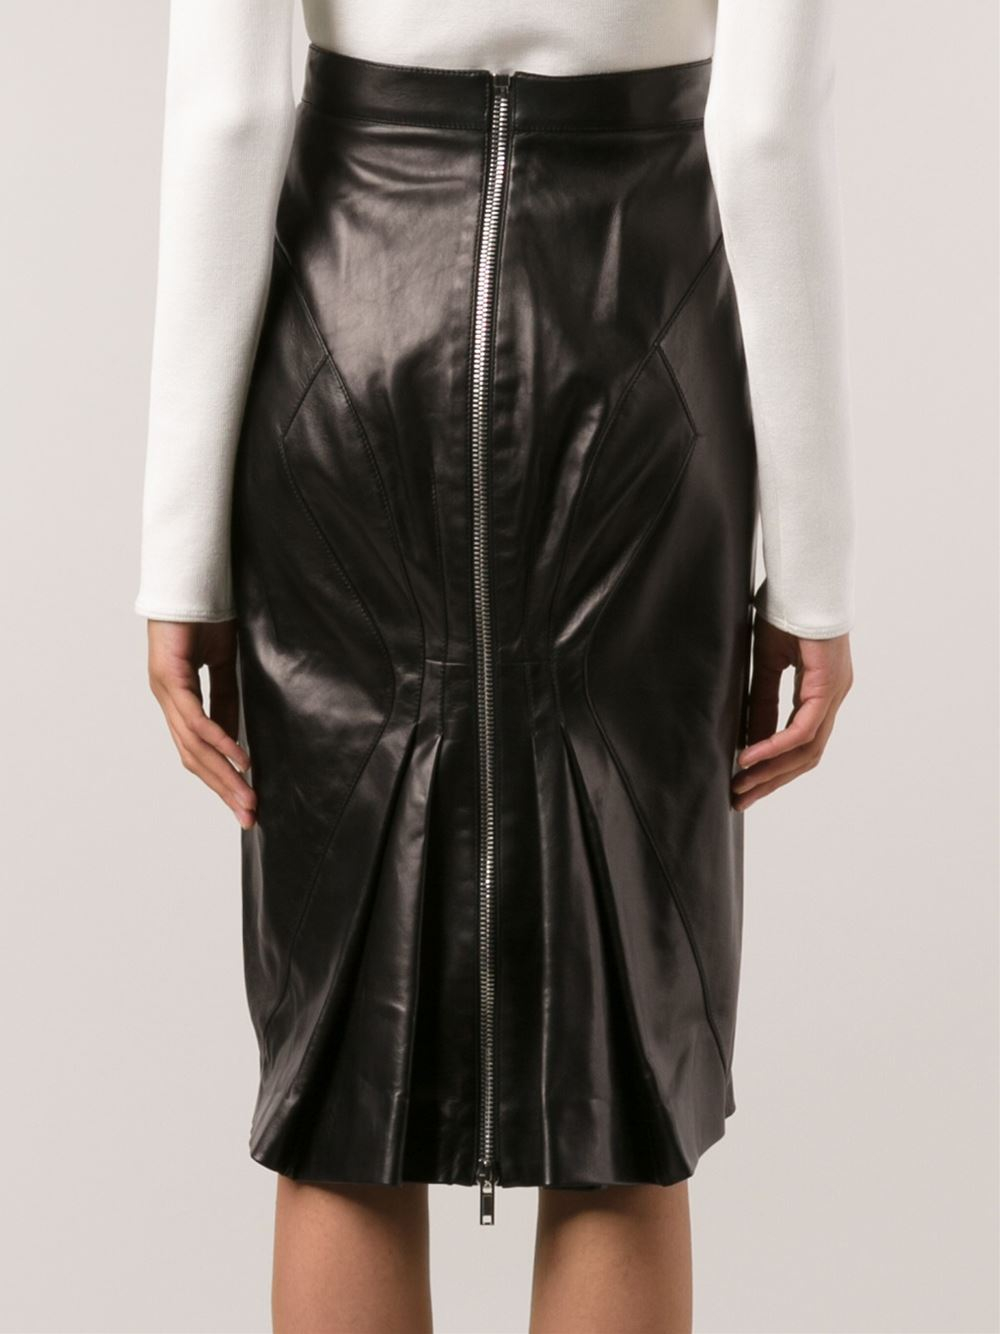 Givenchy Fishtail Leather Skirt in Black - Lyst